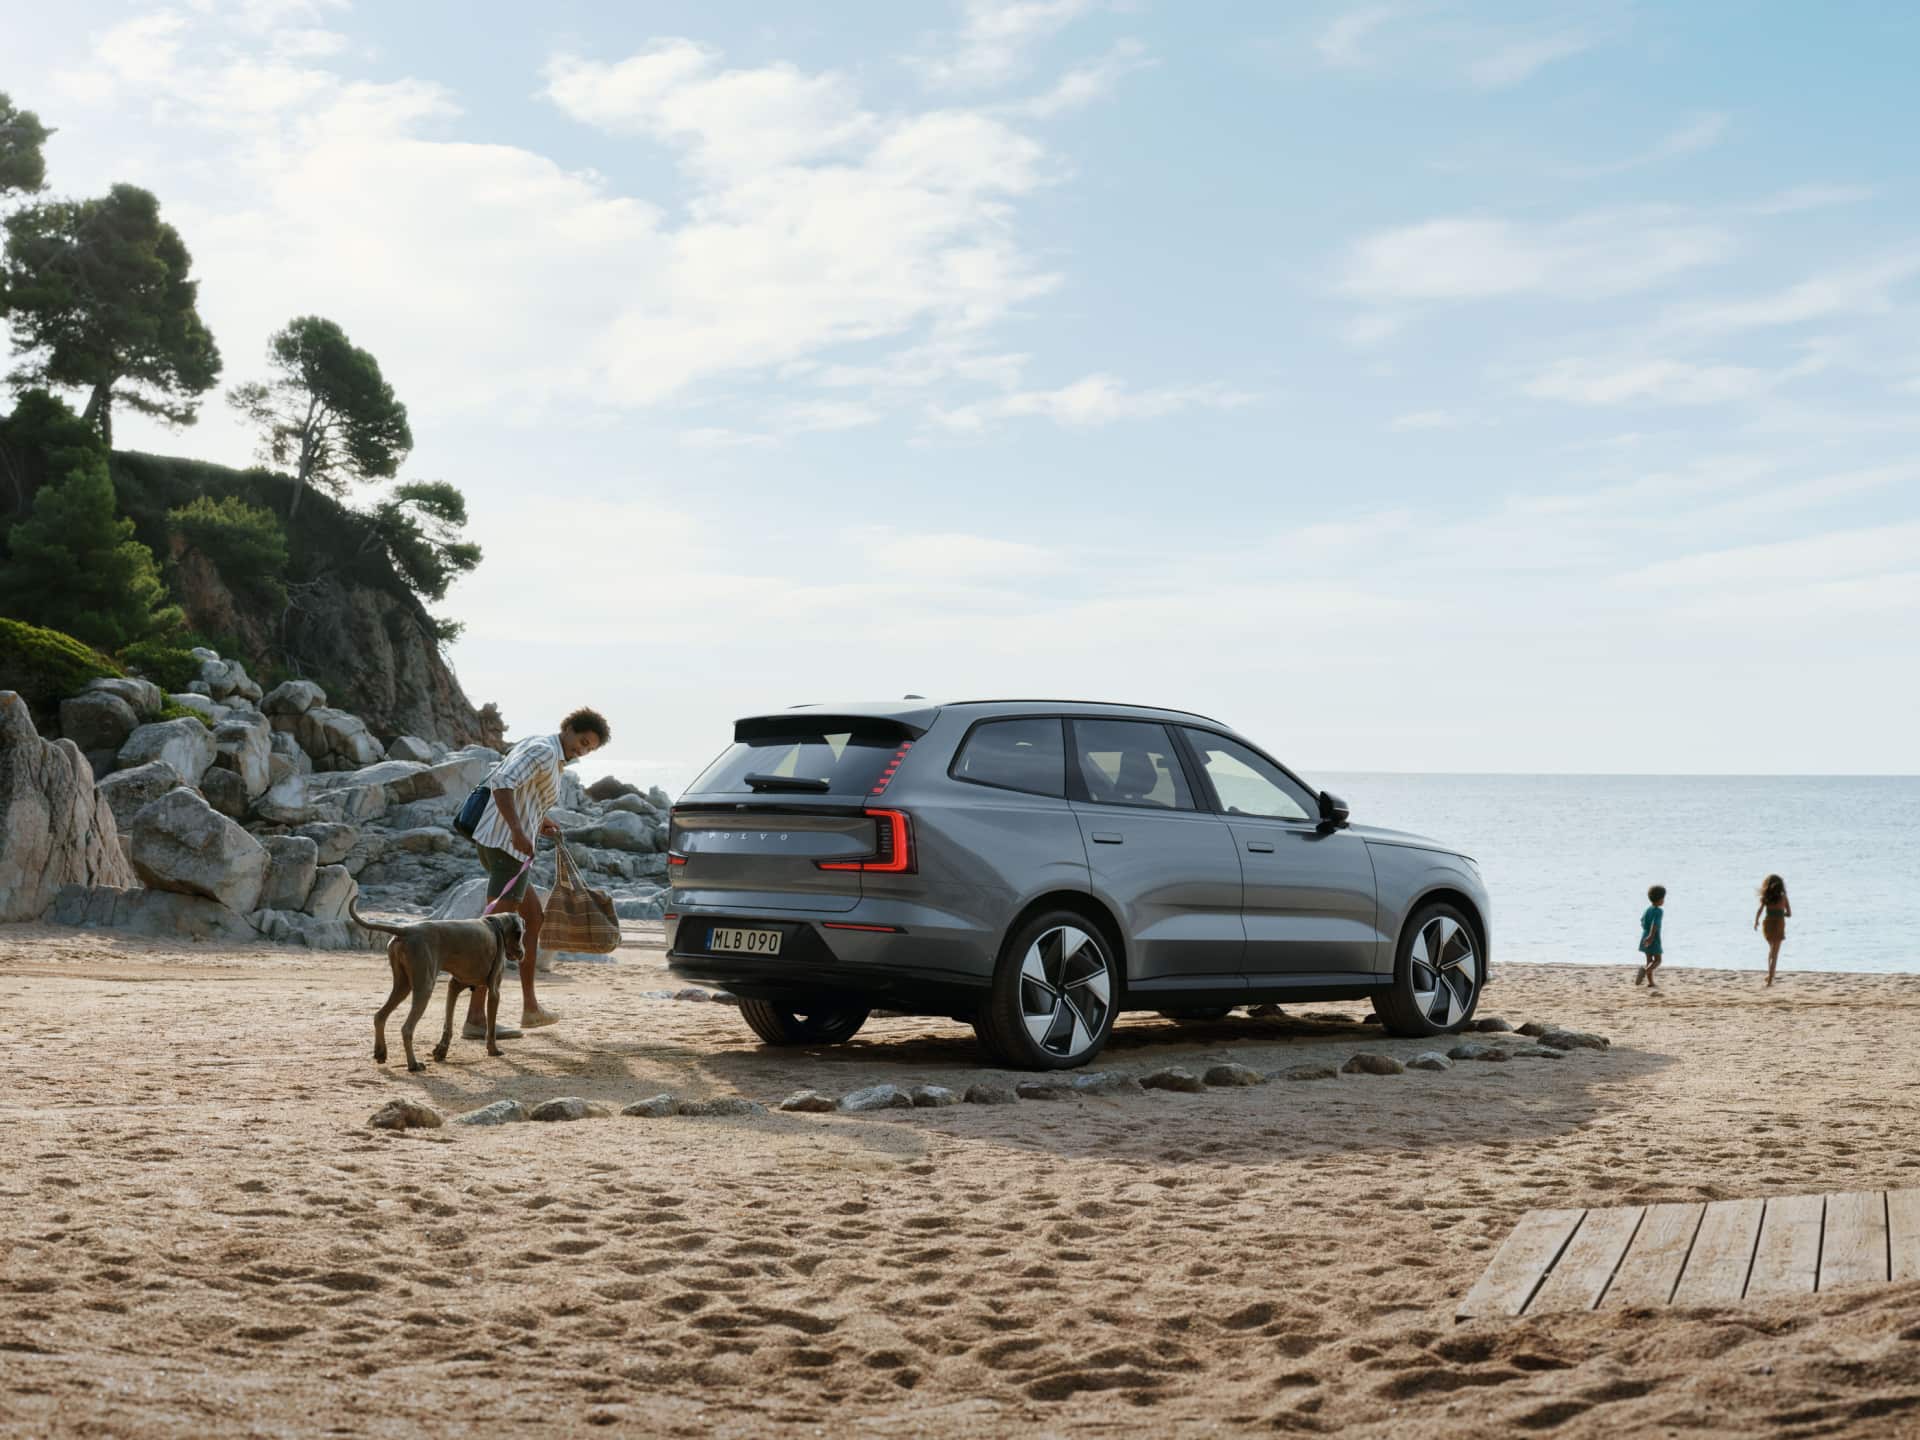 An image showing a man and a dog walking next to a Volvo EX90 parked on a beach.